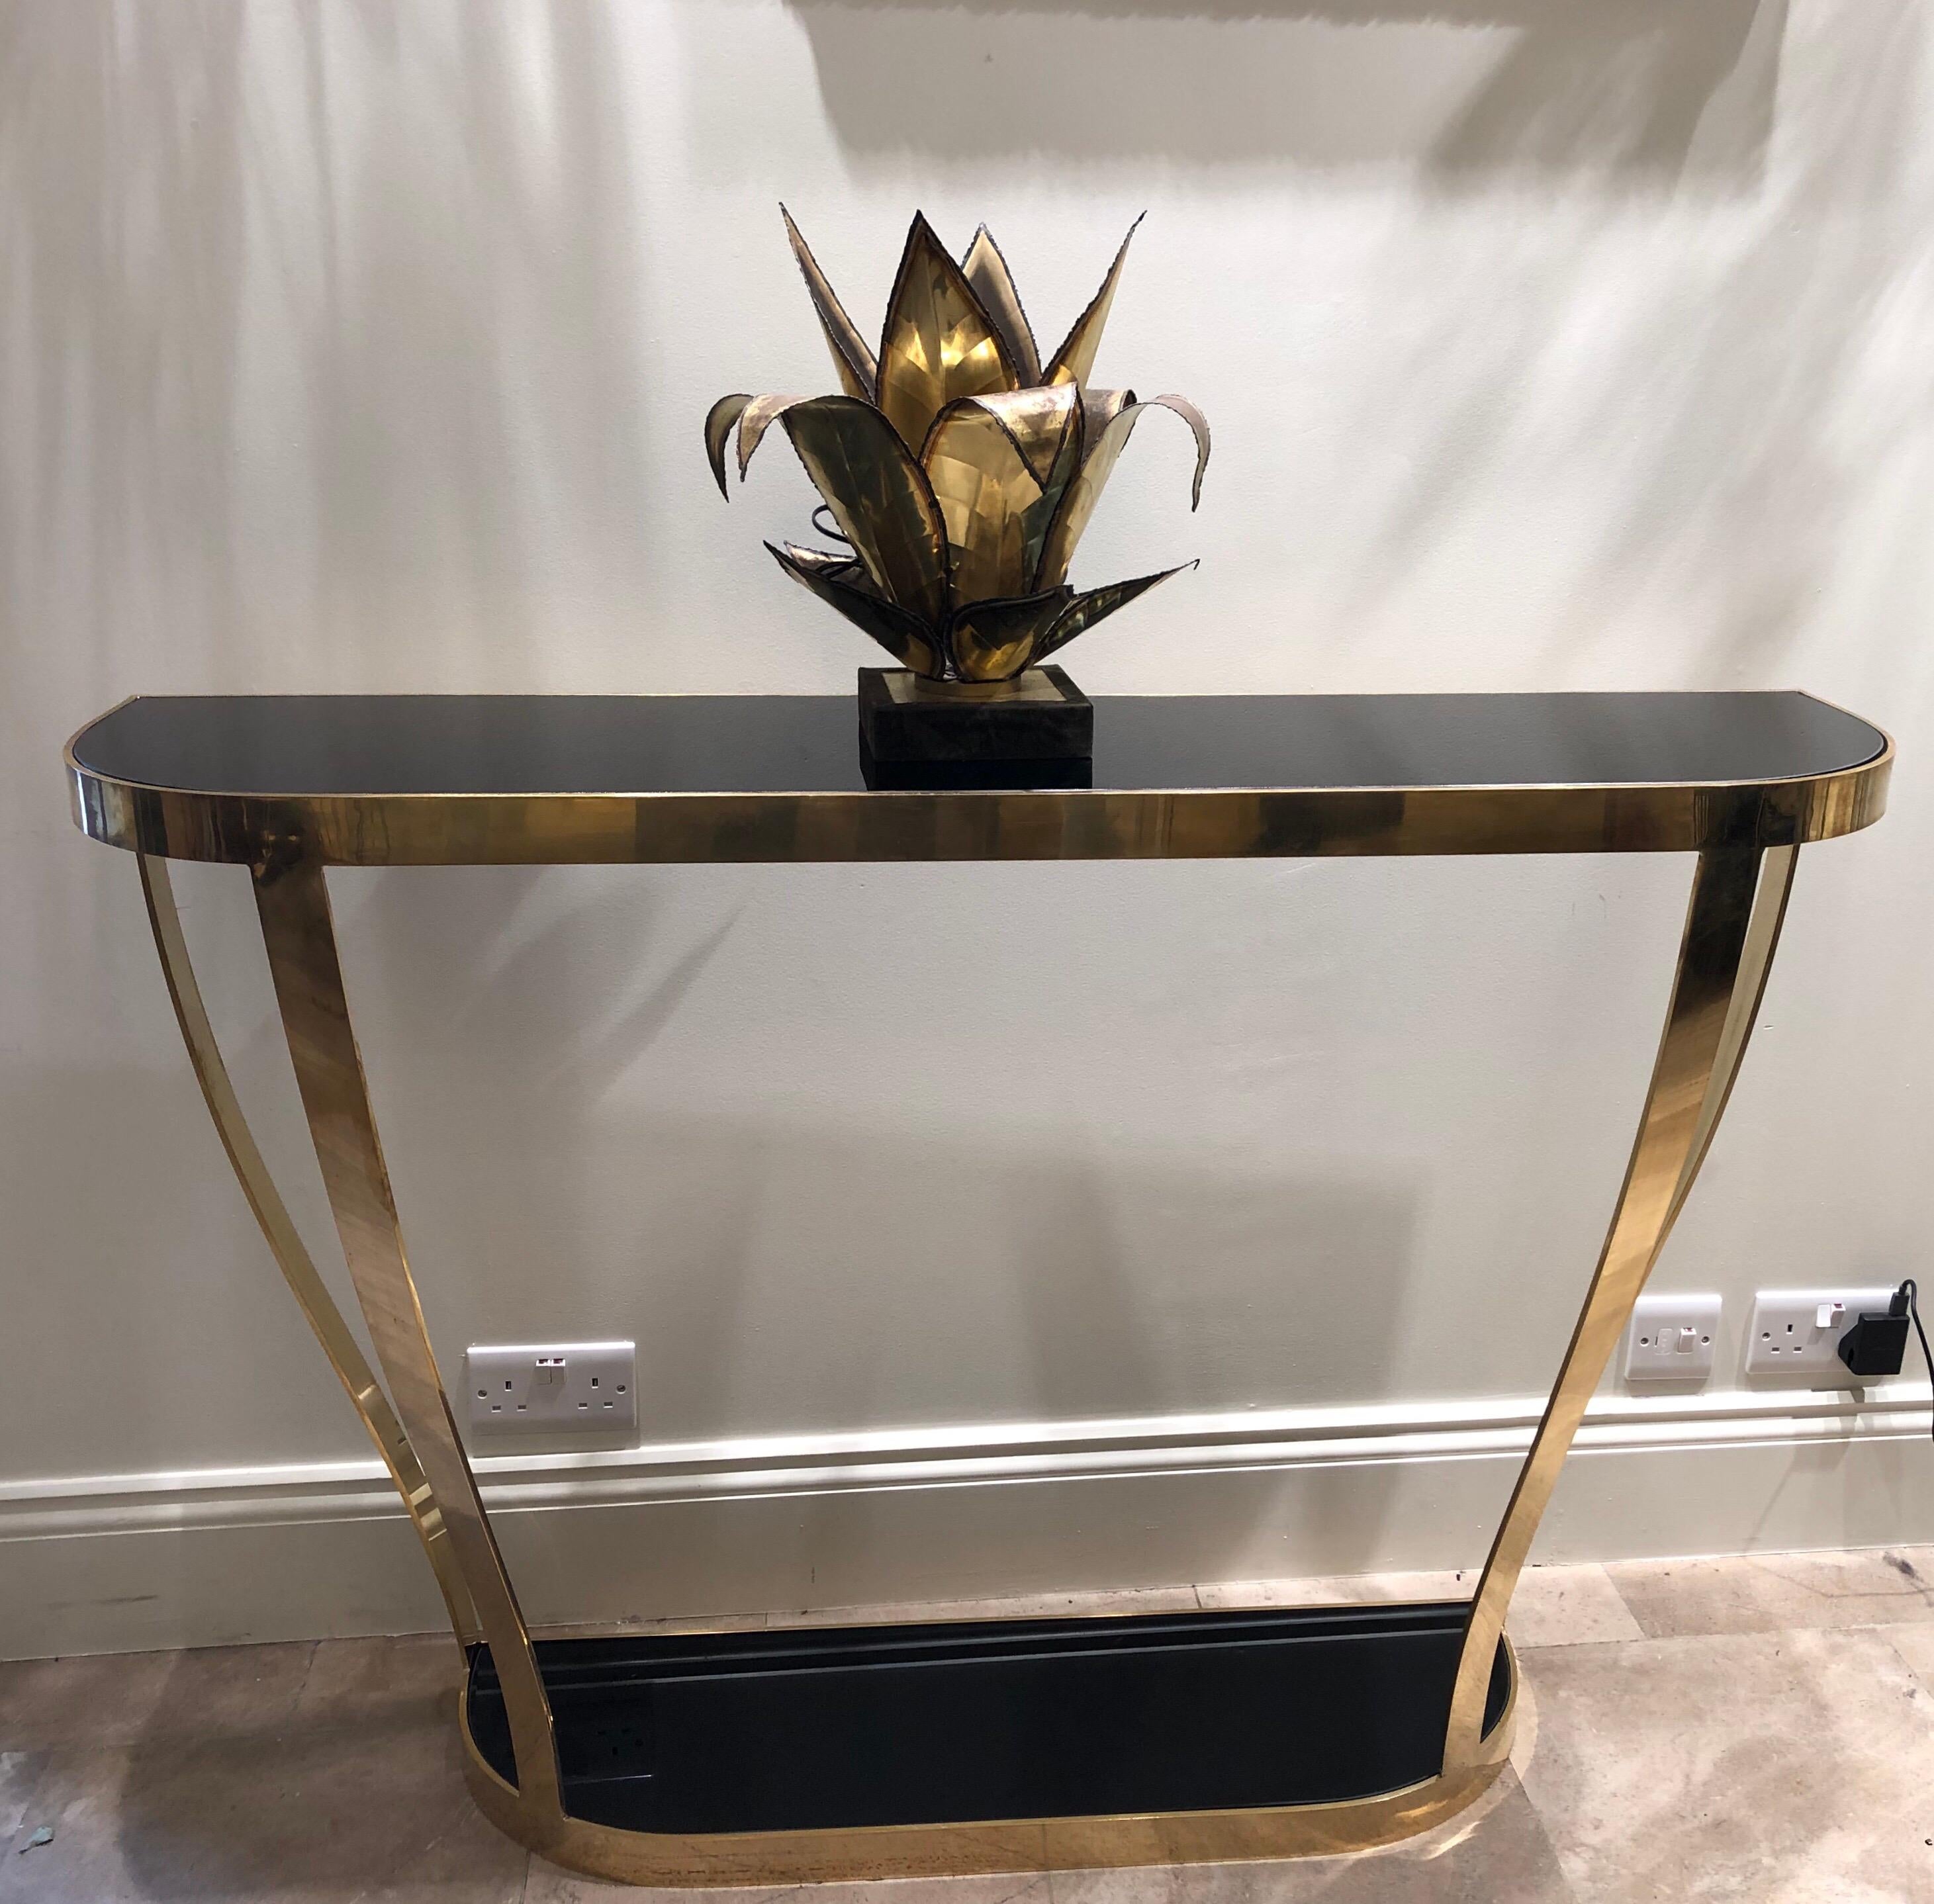 A console table by Rkade Studio which has been crafted in curved brass and black glass. There are a pair available or they can be sold separately. There is a bottom black glass shelf.